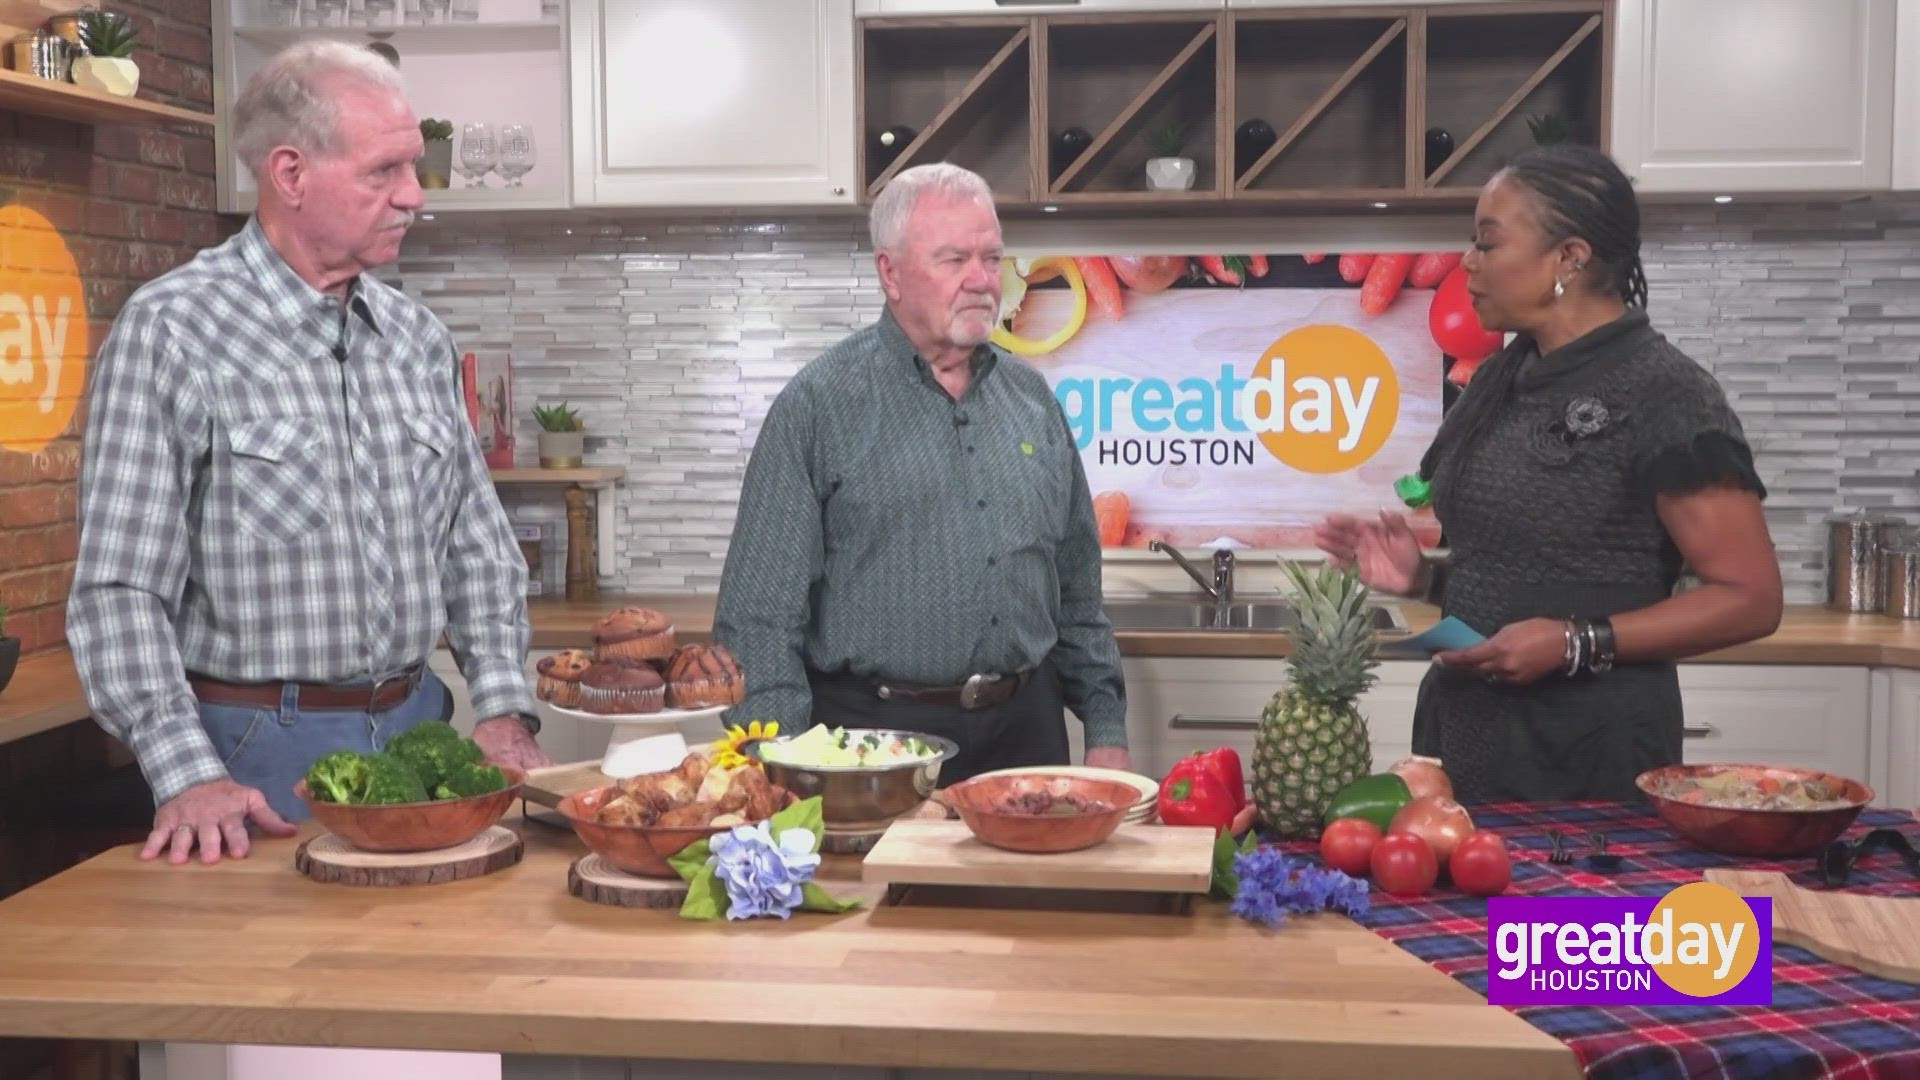 Al Massey and Mike Kramer with Lettuce Eat stopped by with some food for thought on their friendship and restaurant.